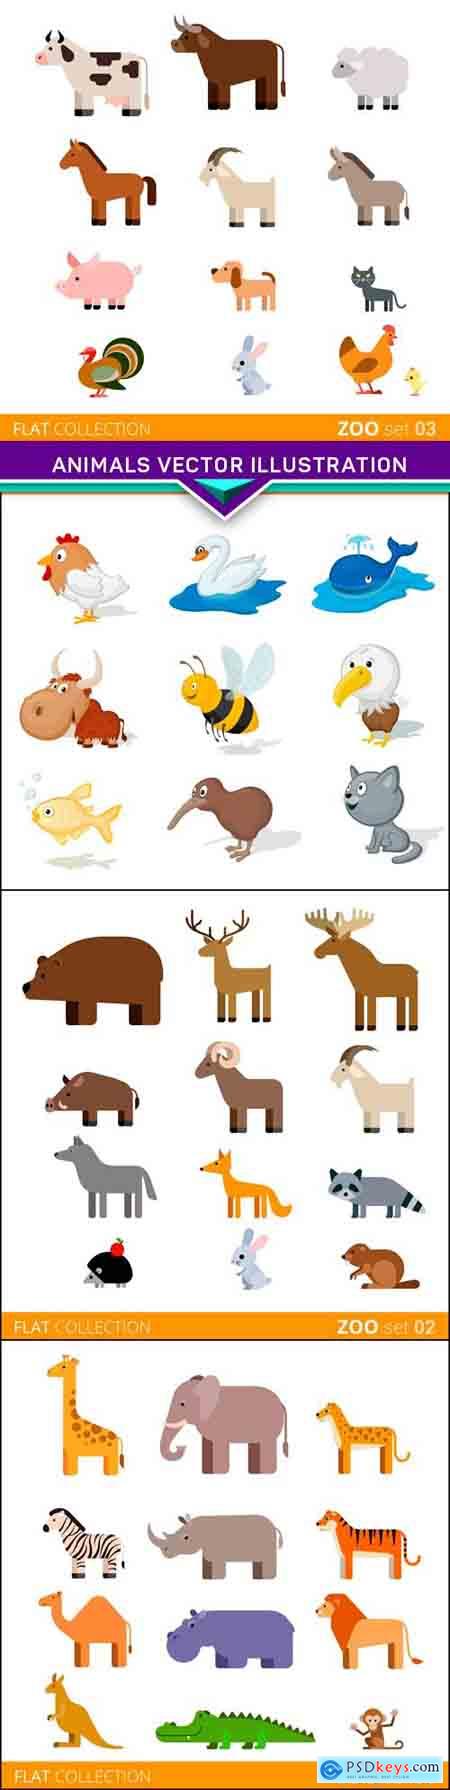 Collection of animal vector illustration 4x EPS